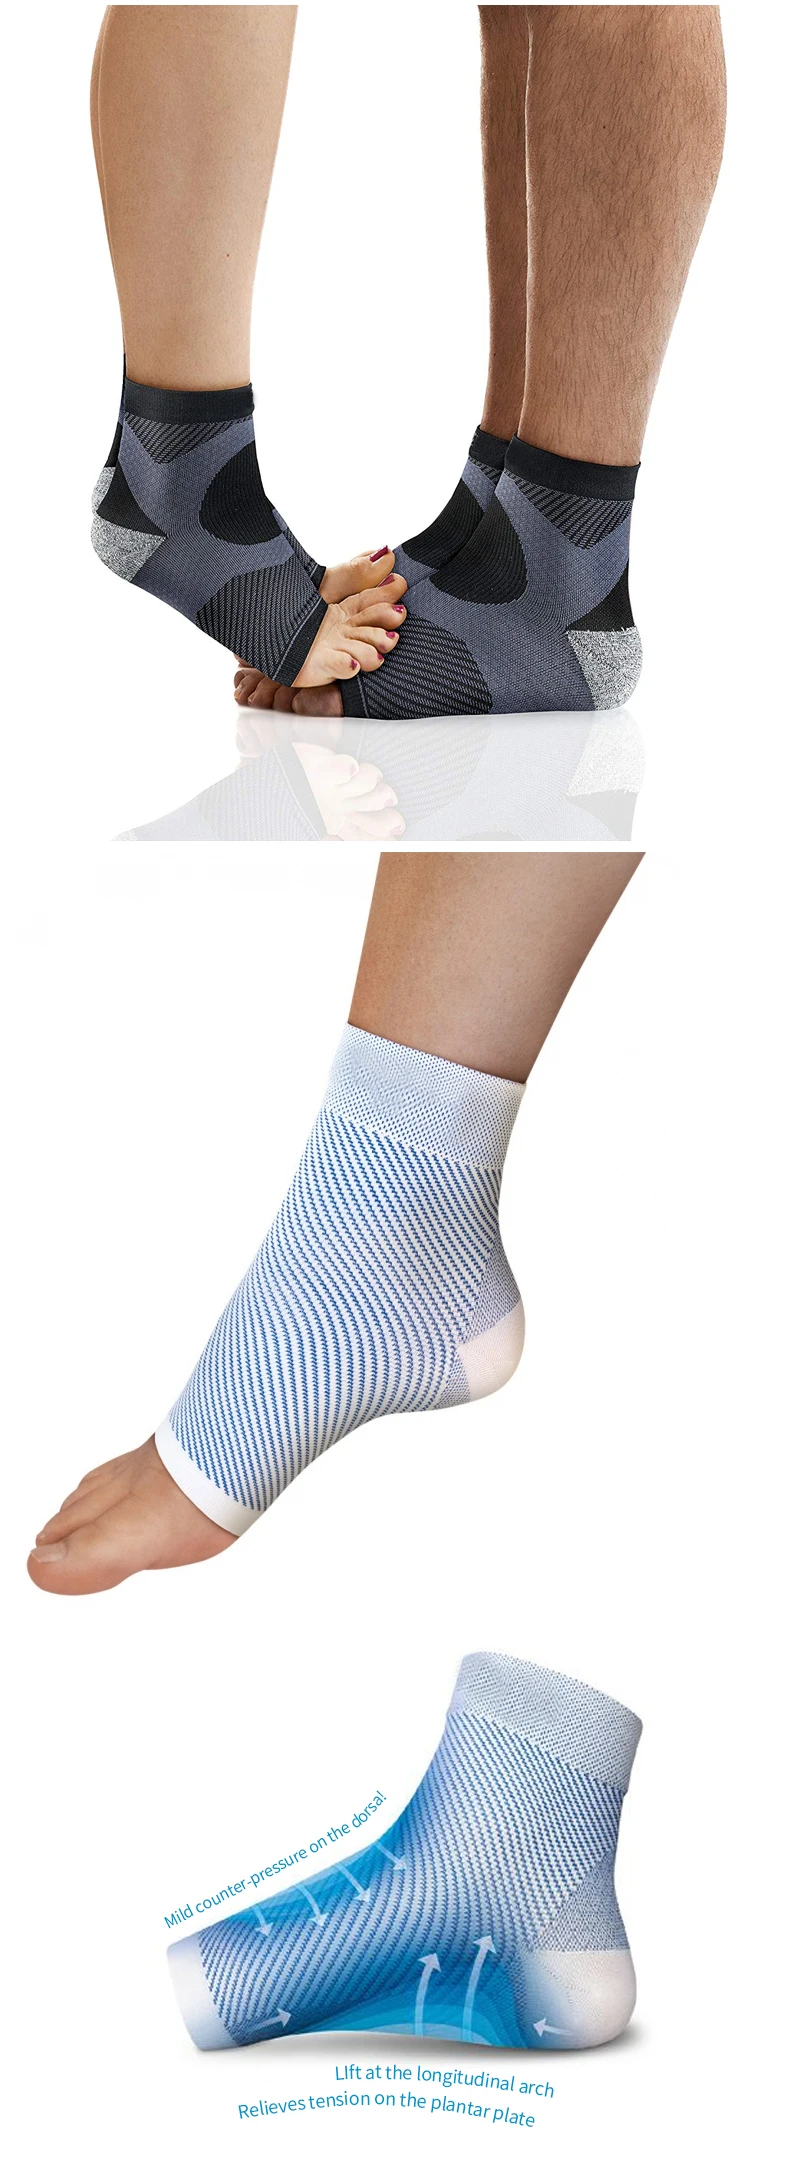 Enerup Soreness Pain Relief Compression Ankle Plantar Fascities Sleeve Support Brace Socksfor Sport Exercise Protect